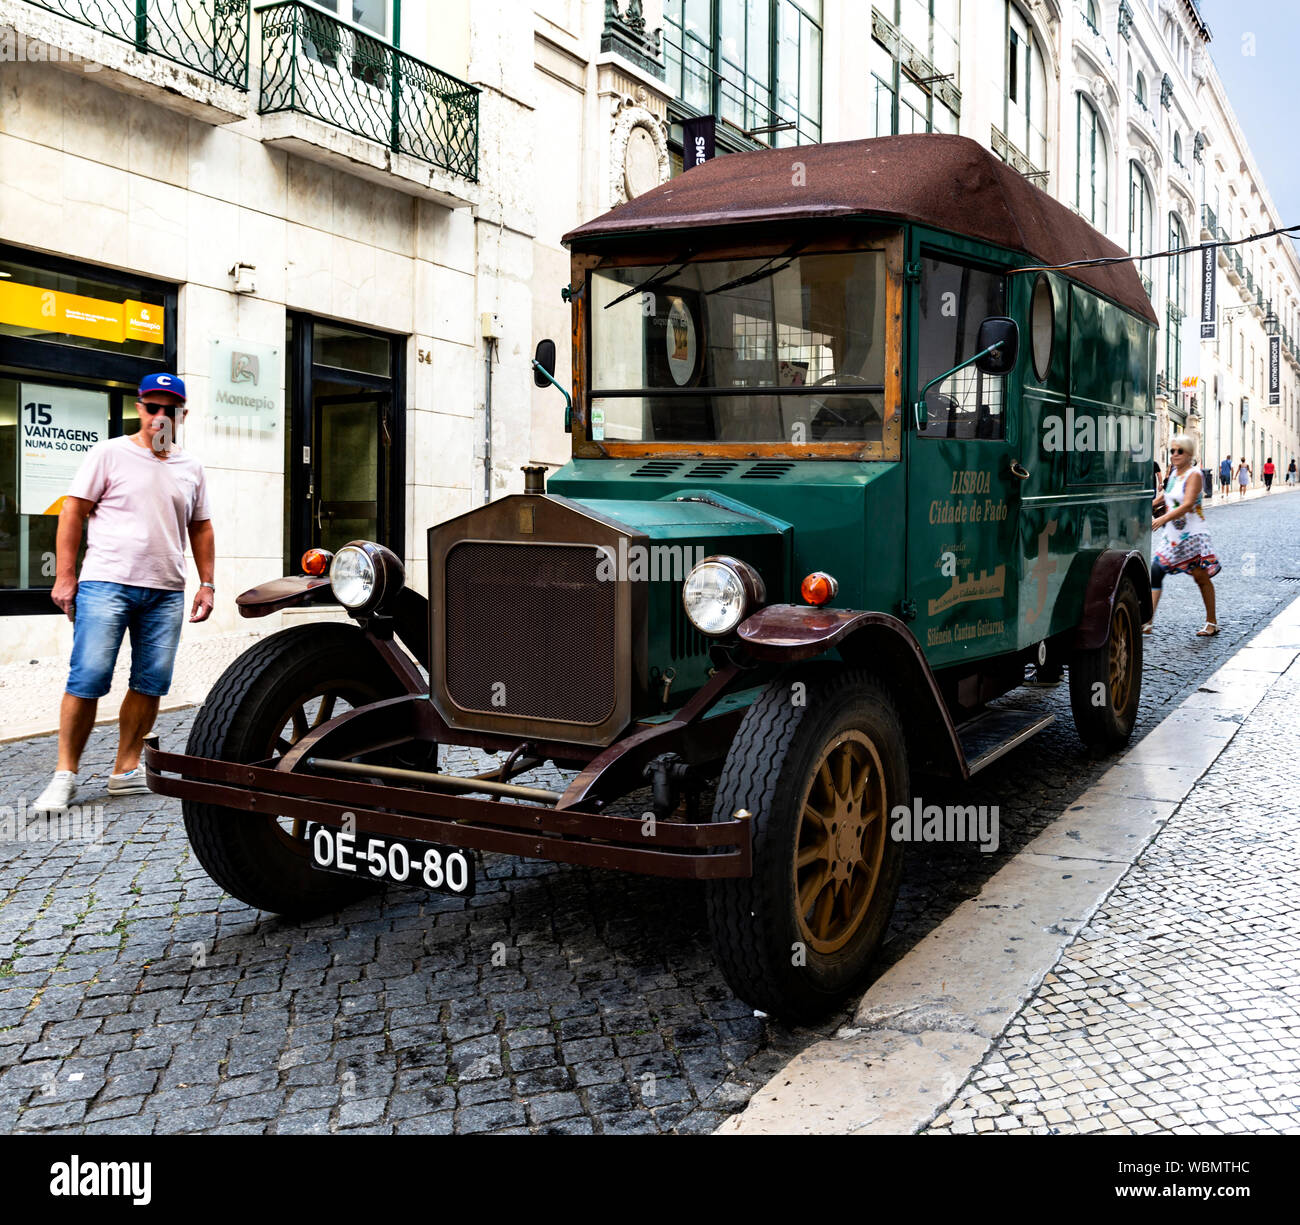 Old green vintage commercial van parked by the road side, Lisbon, Portugal. Stock Photo